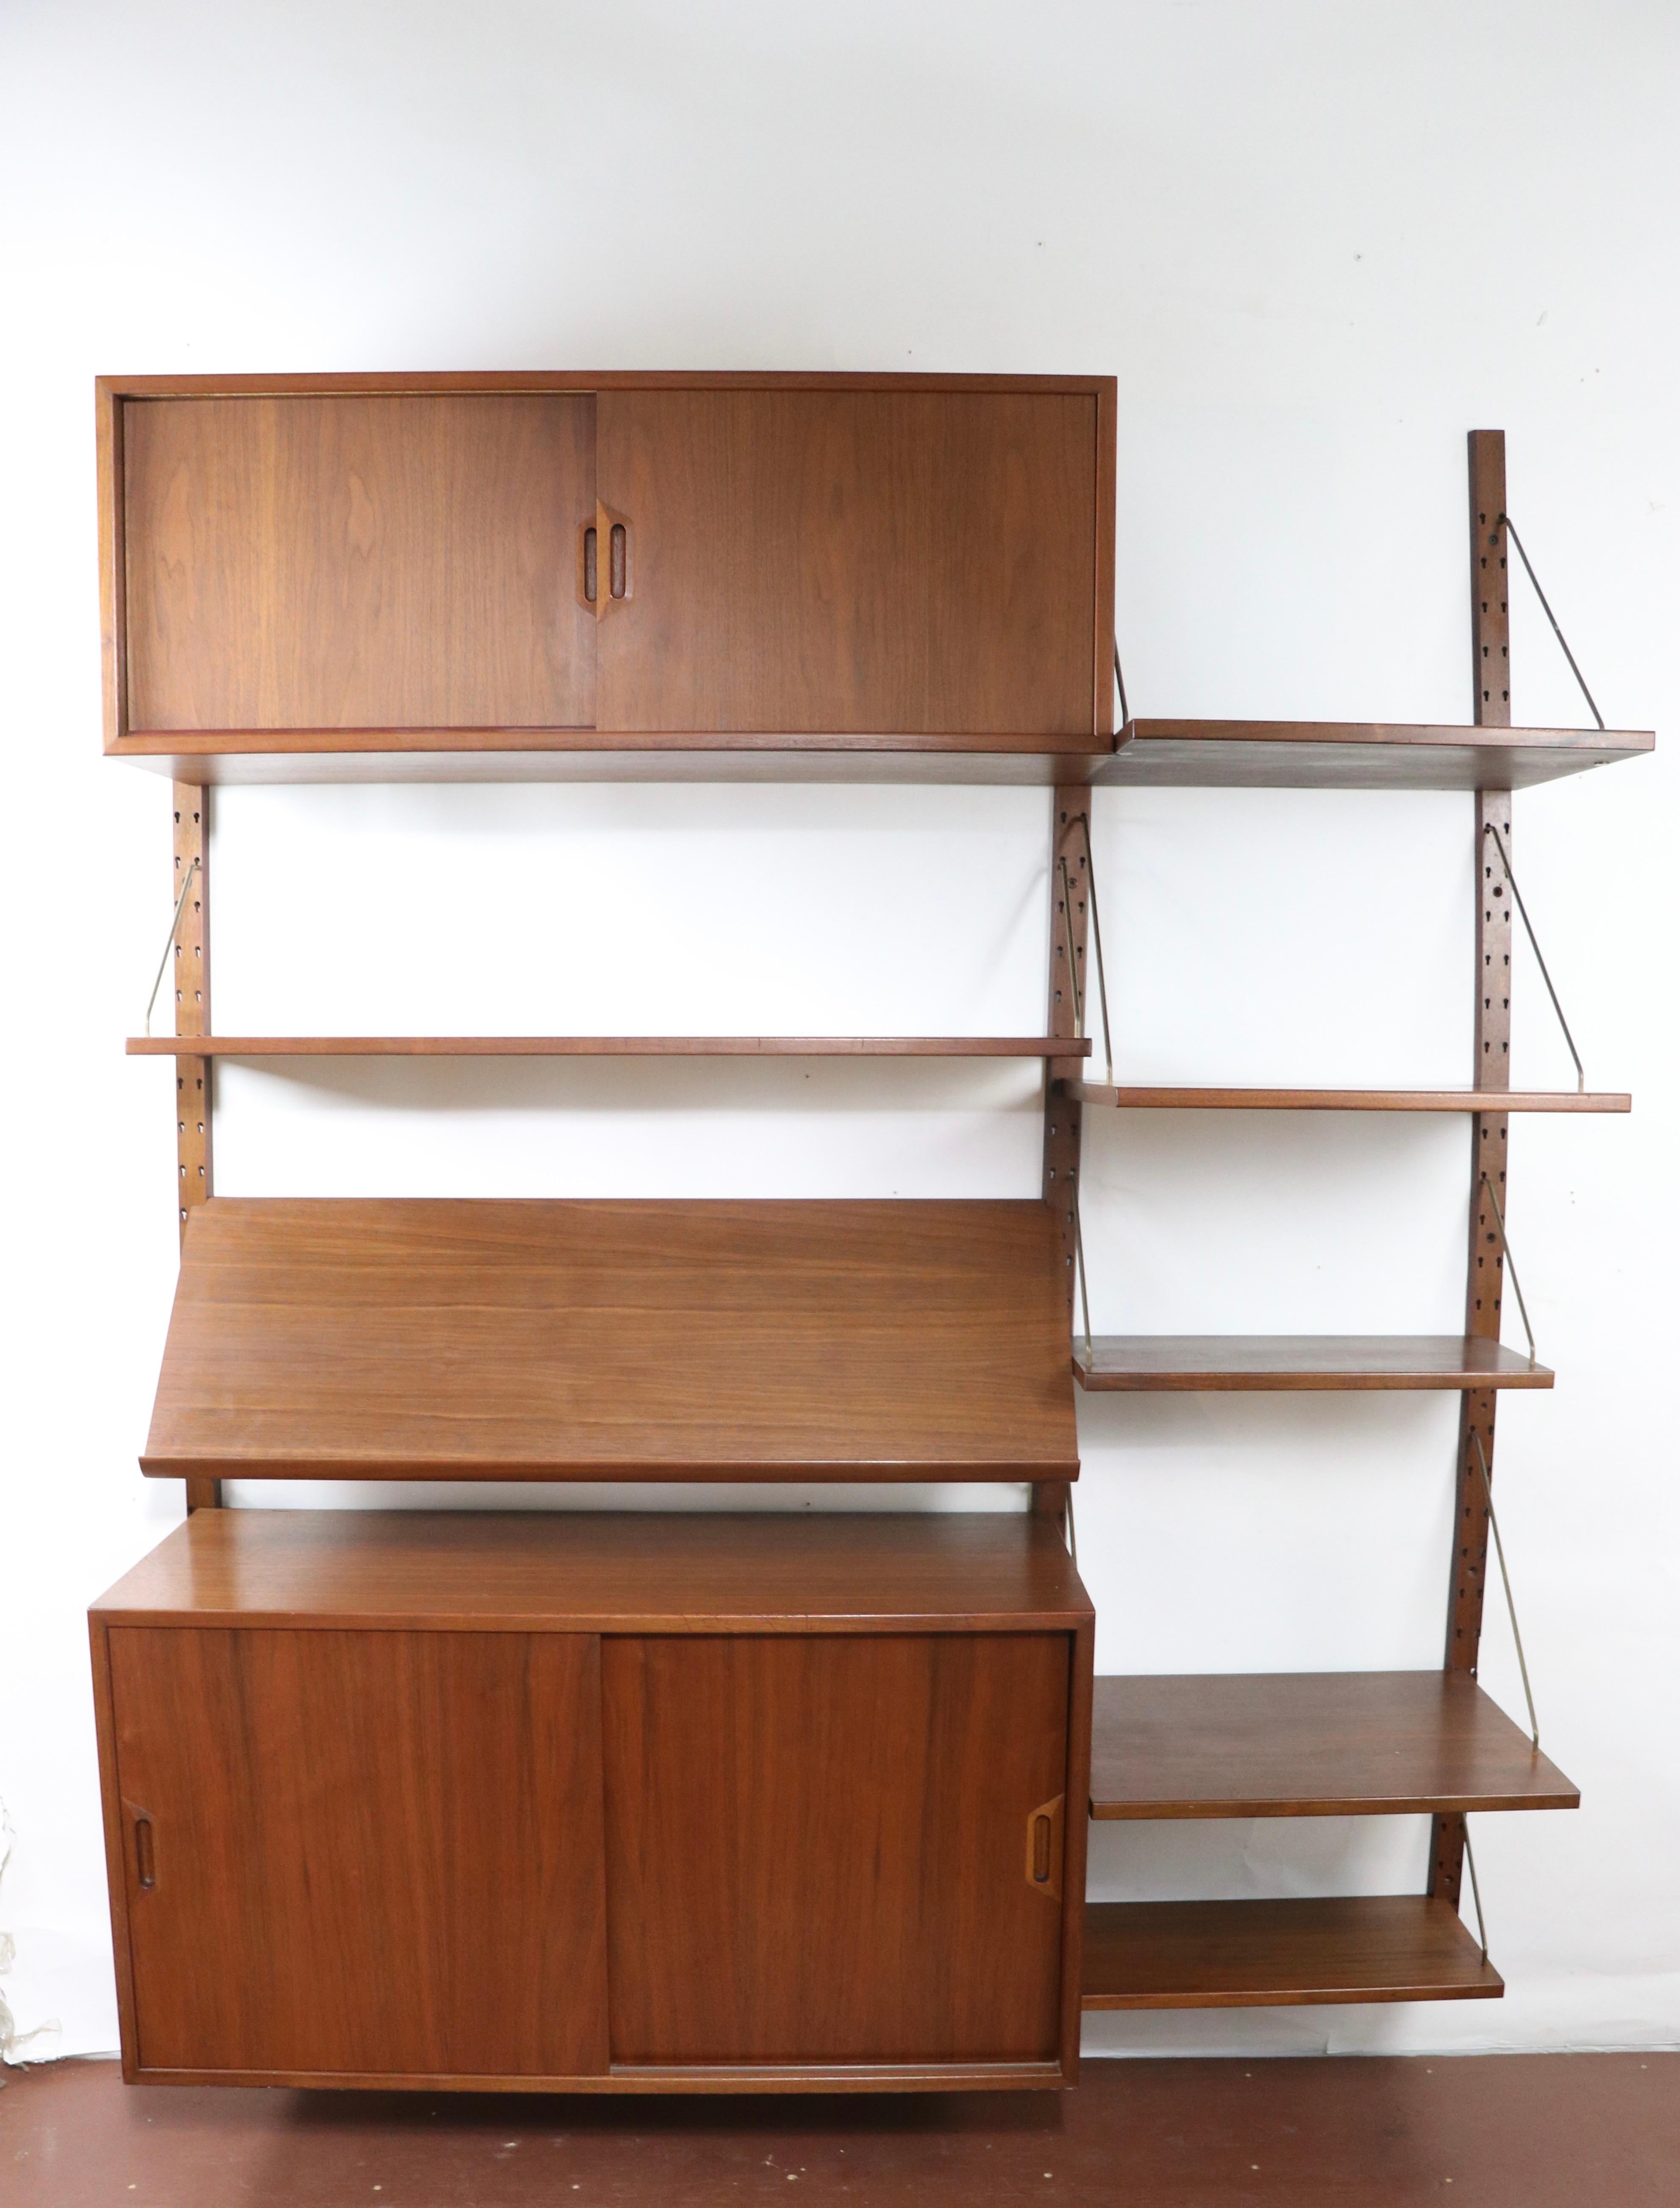 Nice Danish Modern wall unit designed by Sven Ellekjaer, imported by Raymor. This nice set features two storage cabinets, seven shelves, and three vertical supports. The elements are adjustable in position, allowing multiple configurations to suit